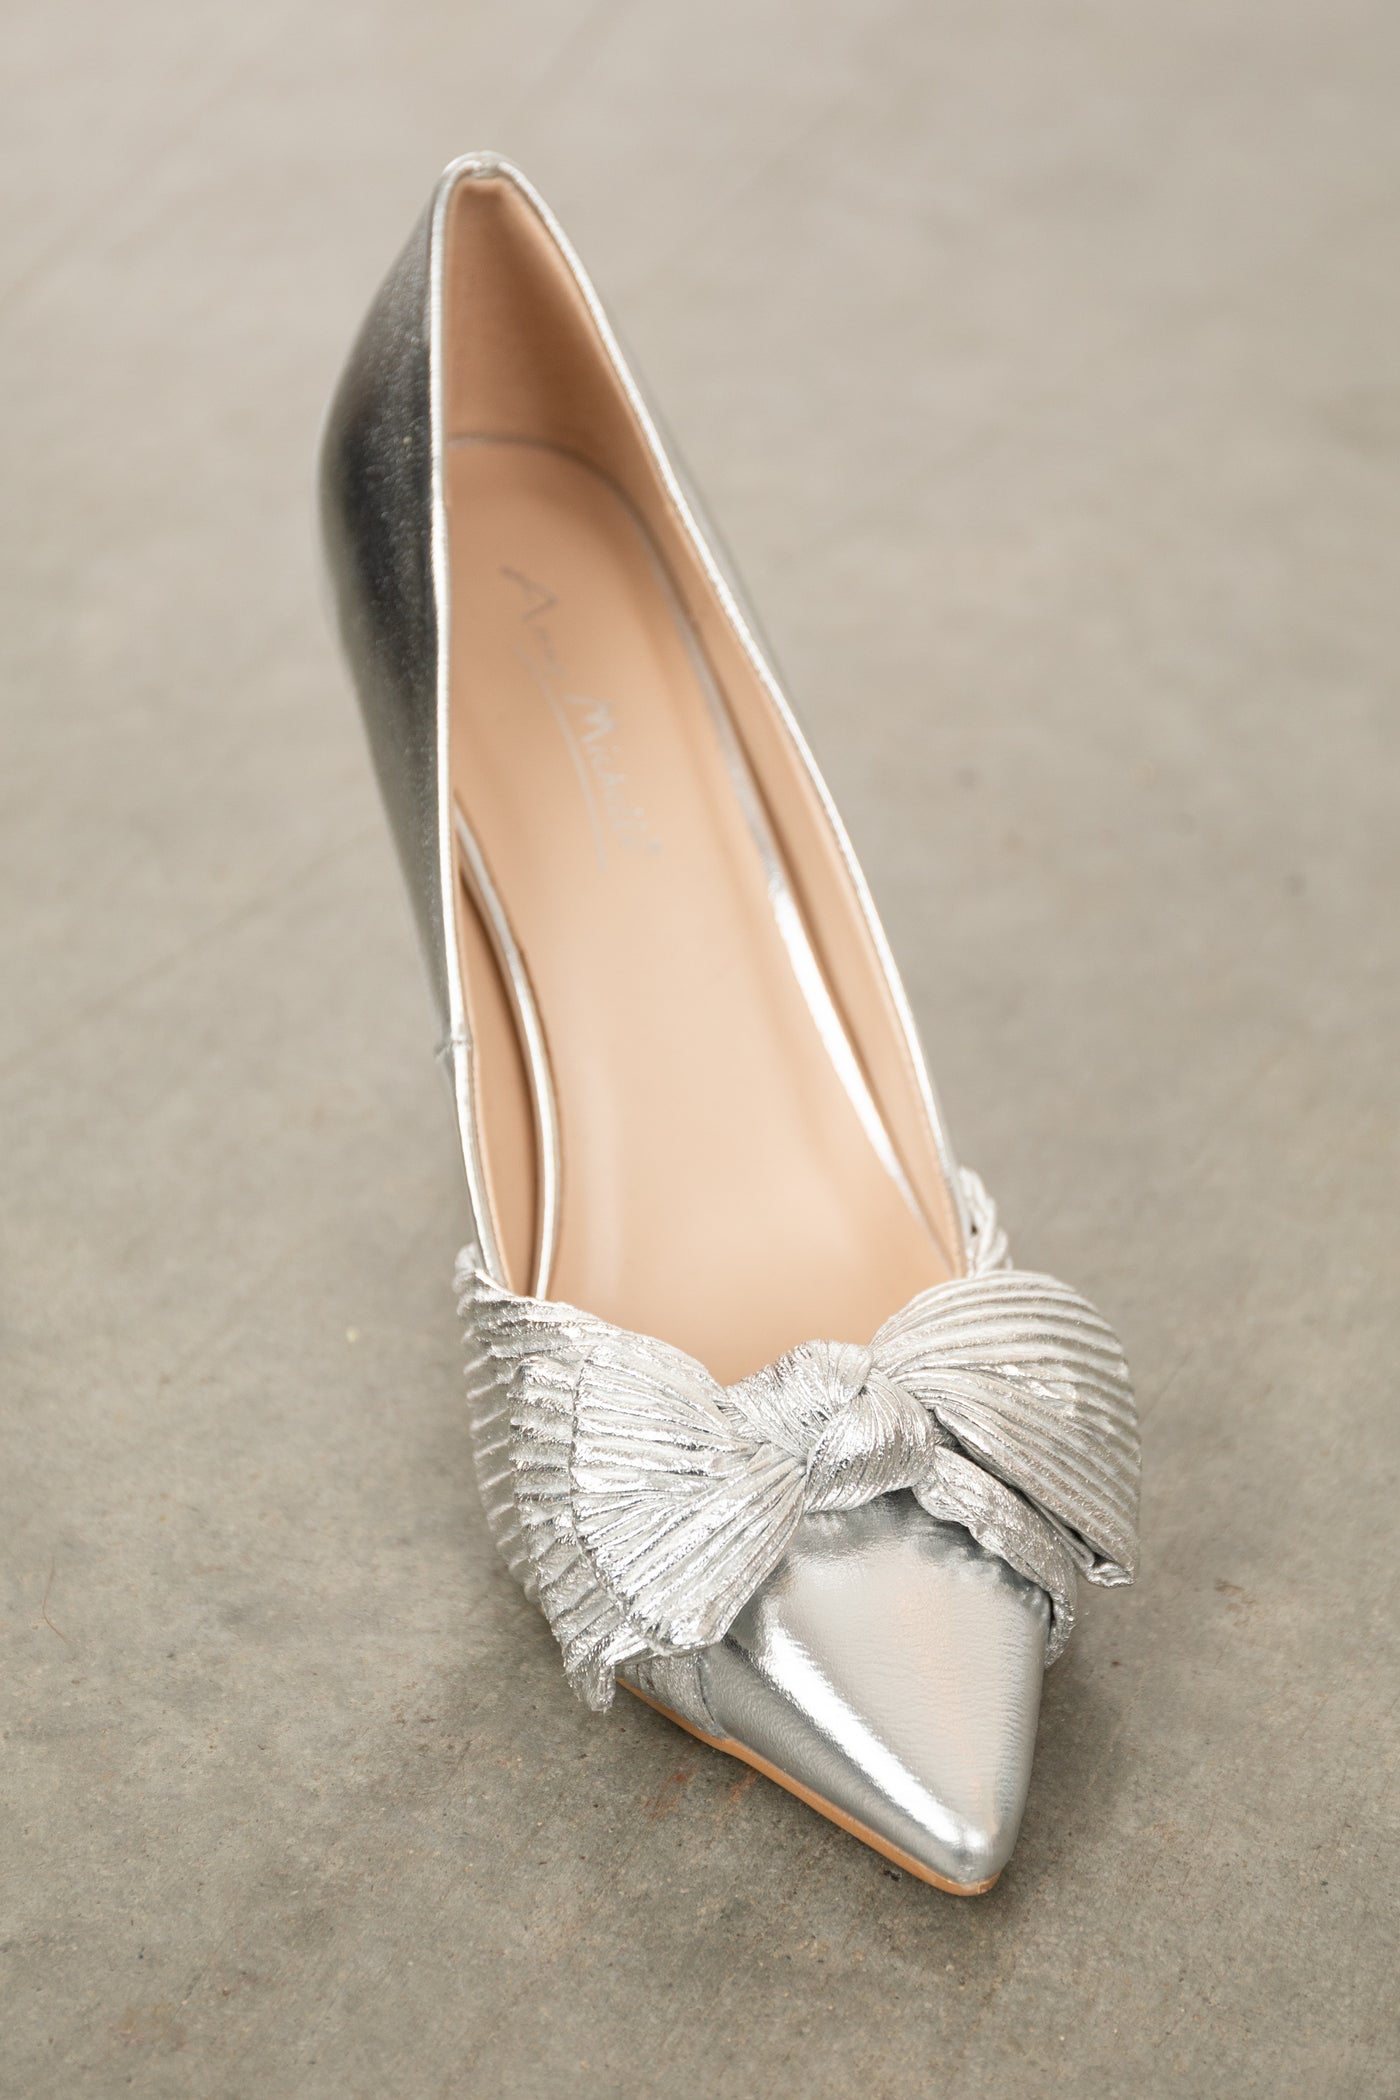 Silver Metallic Pointed Toe Heels with Bow Detail